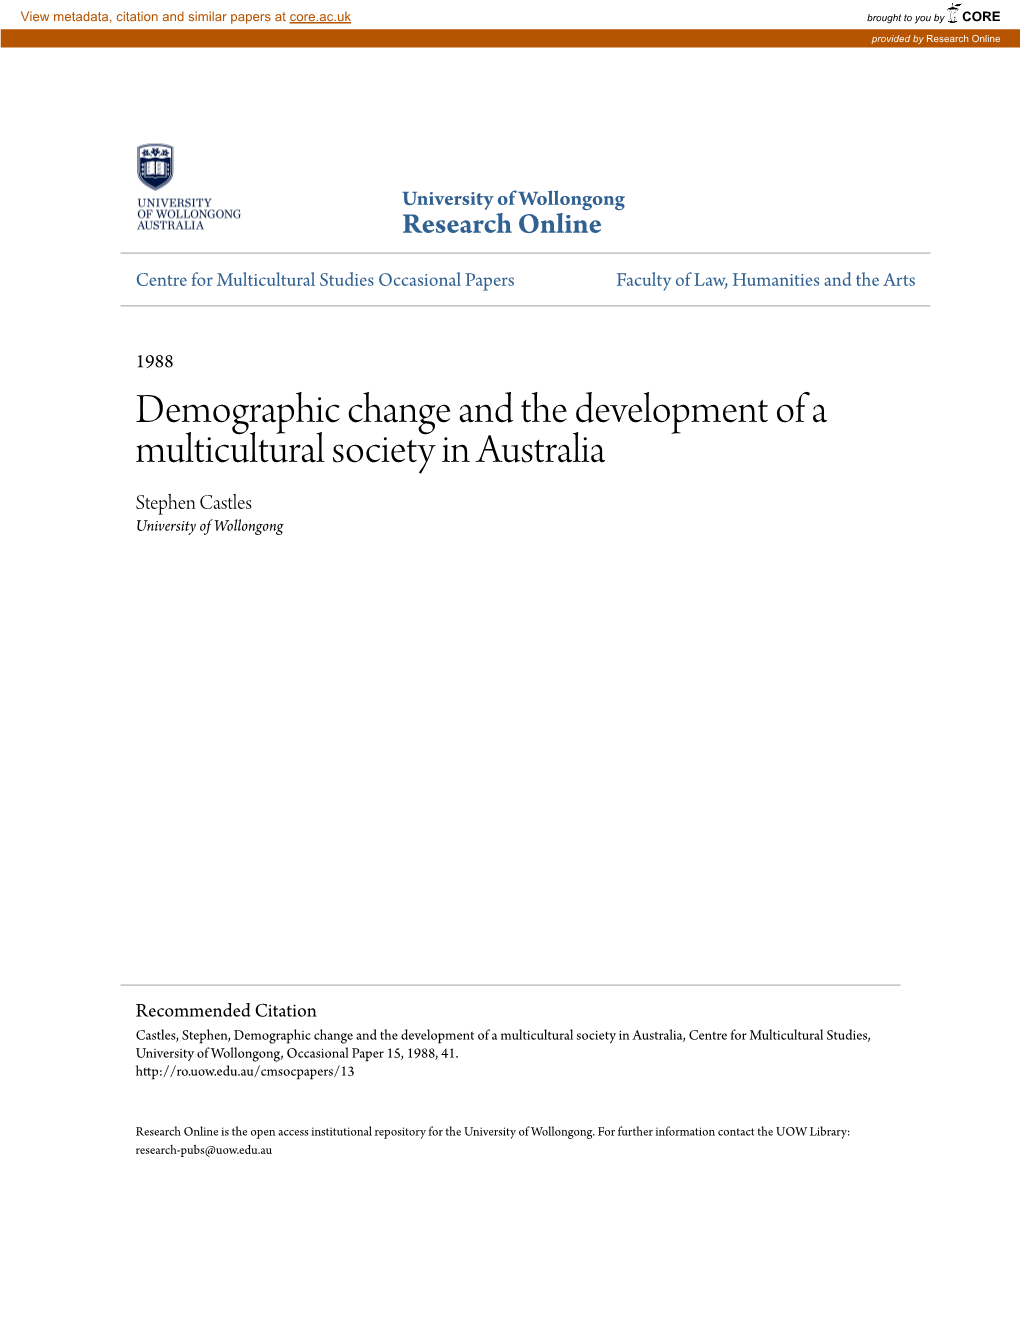 Demographic Change and the Development of a Multicultural Society in Australia Stephen Castles University of Wollongong